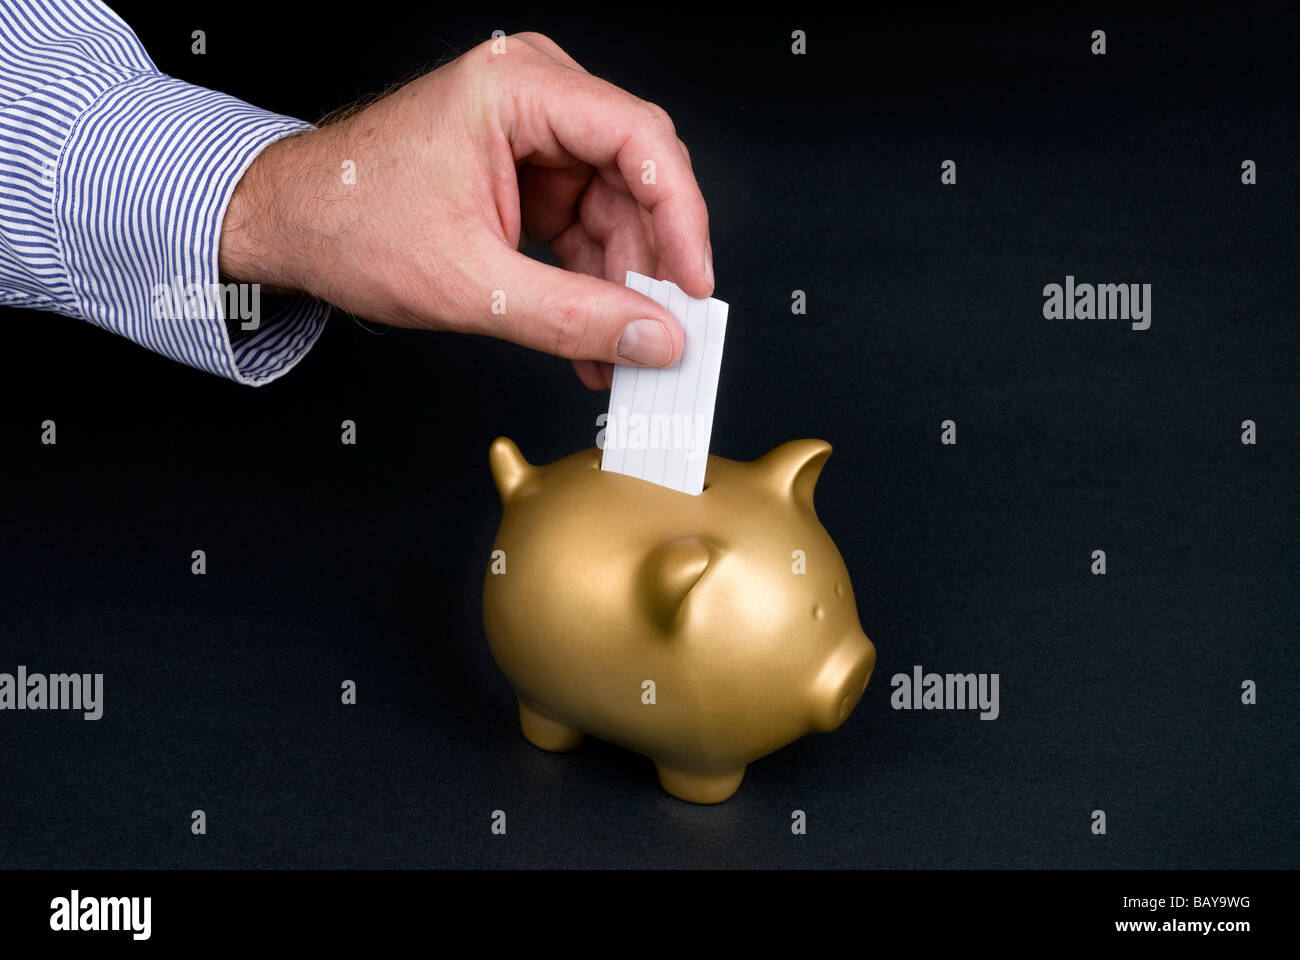 A man places a slip of paper into a piggy bank with copy space Stock Photo